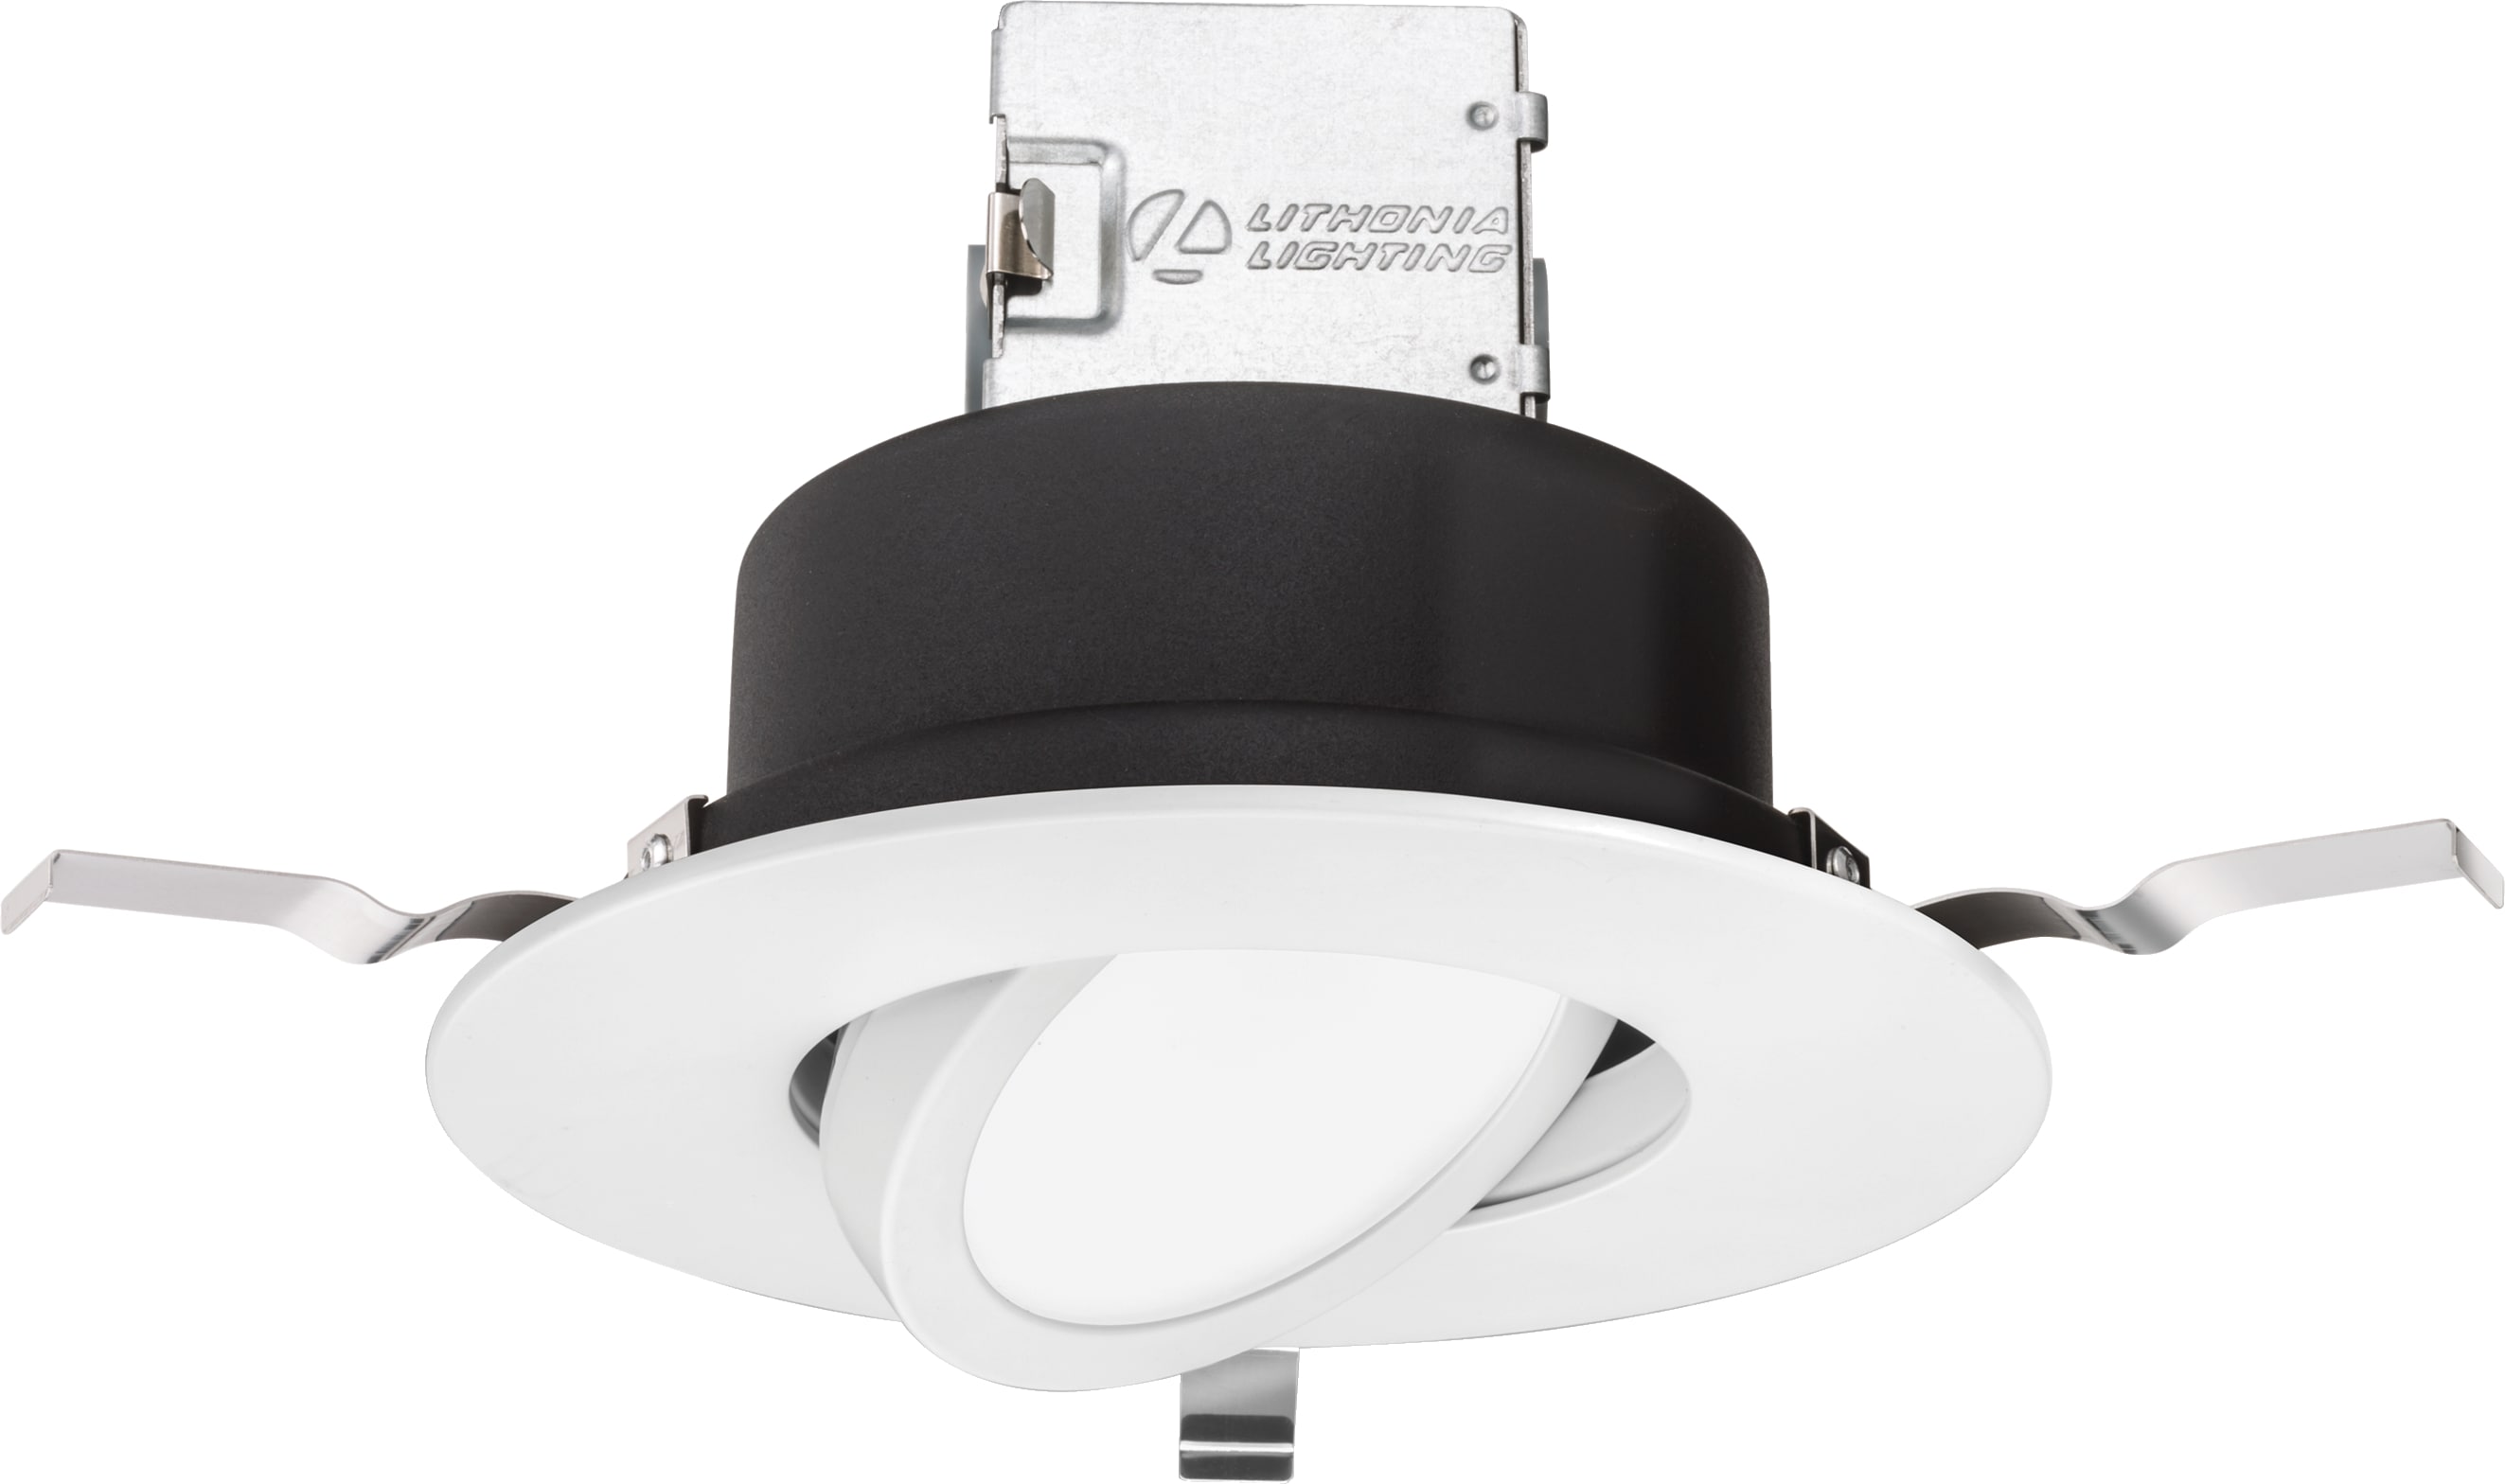 Lithonia Lighting OneUp 4 in Brushed Nickel Recessed Integrated LED Light Kit 